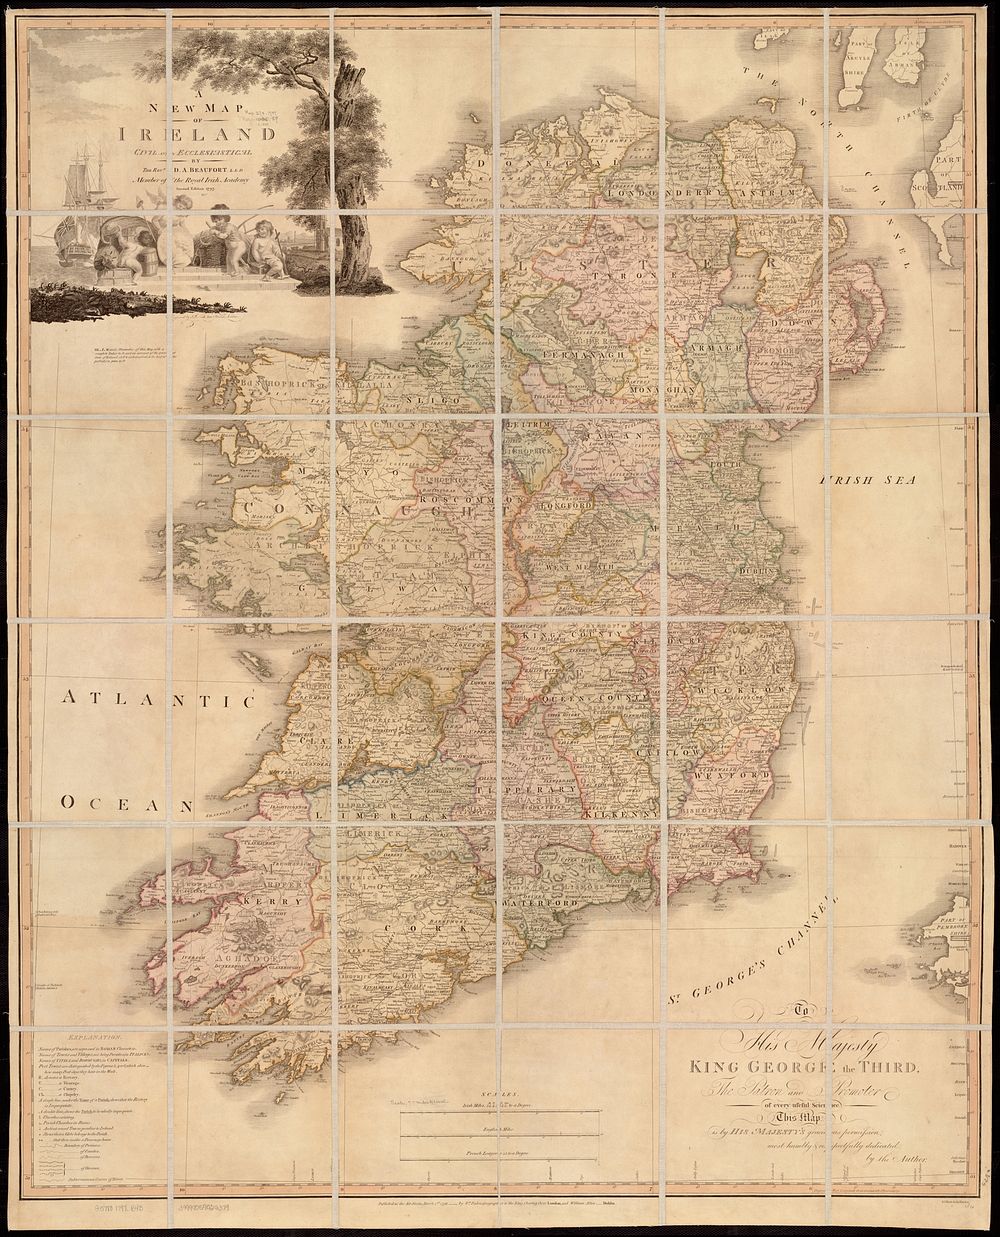             A new map of Ireland : civil and ecclesiastical          